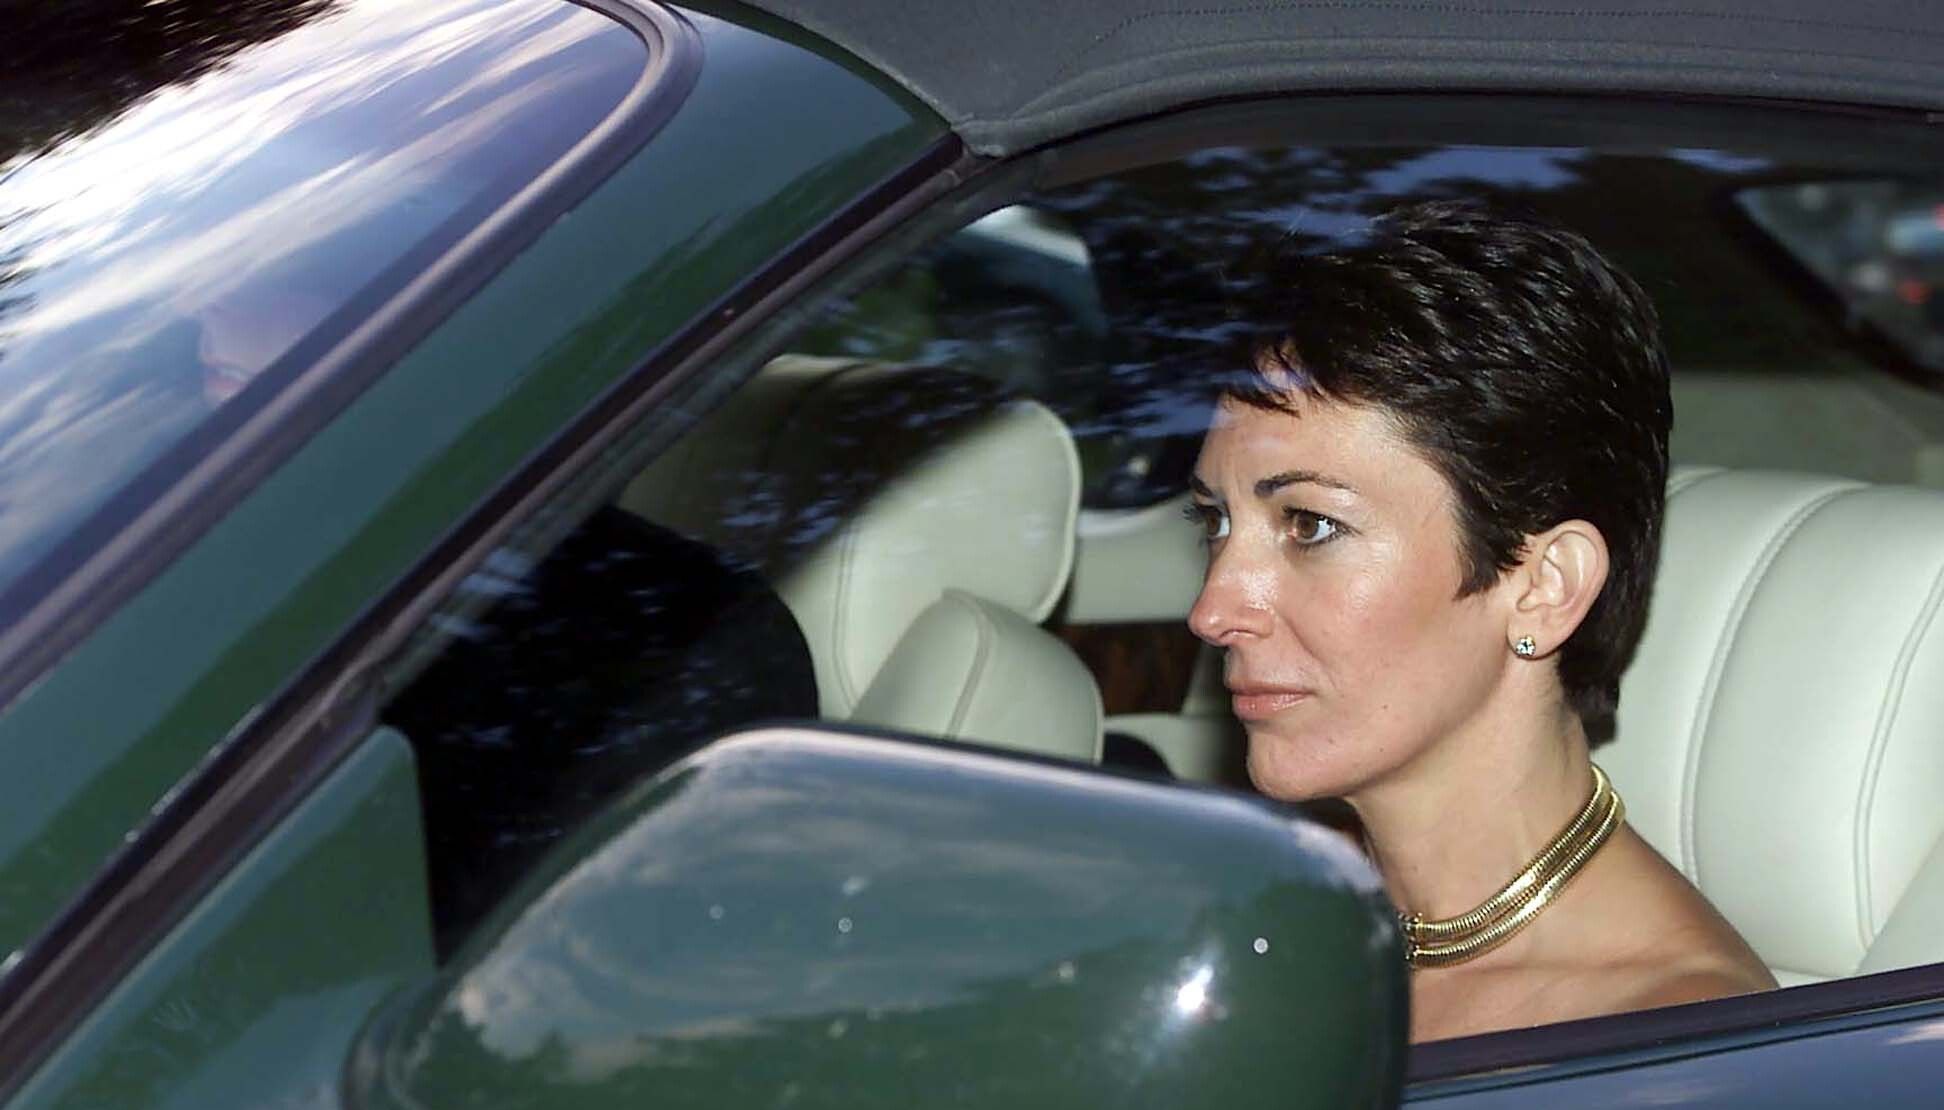 Ghislaine Maxwell will be sentenced on Tuesday morning